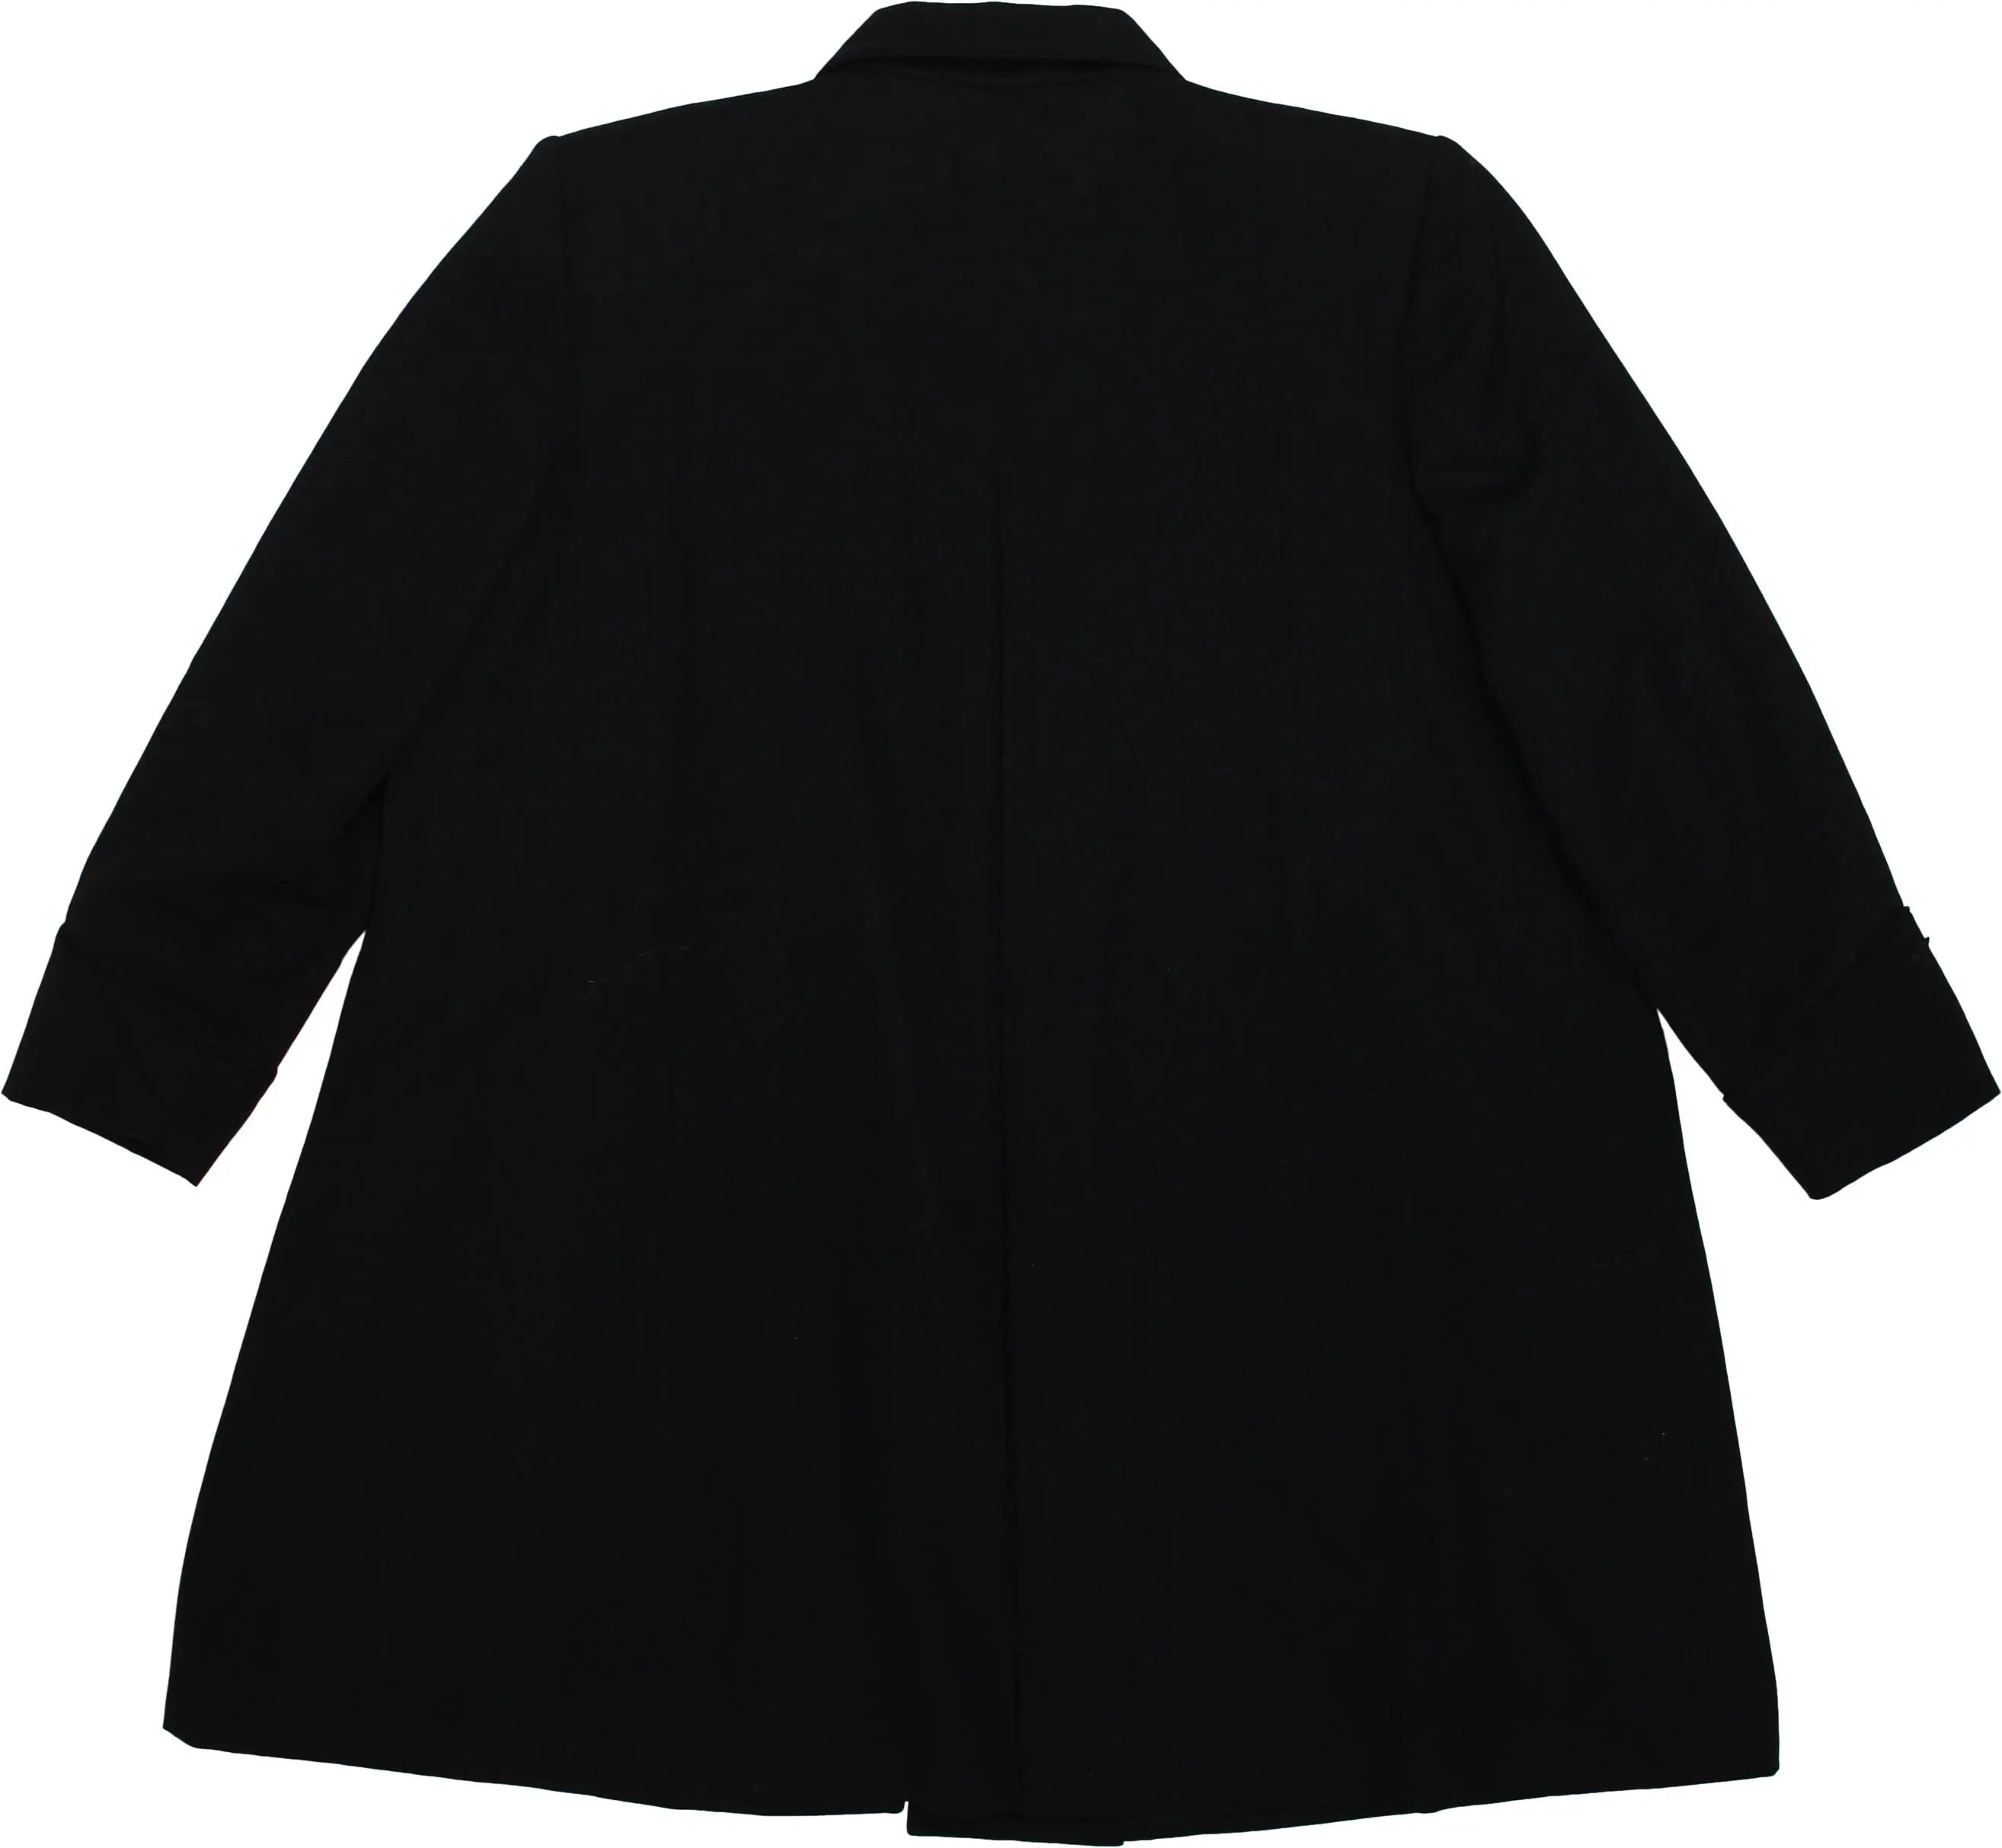 Norma Kamali - Black Blazer with Shoulder Pads by Norma Kamali- ThriftTale.com - Vintage and second handclothing